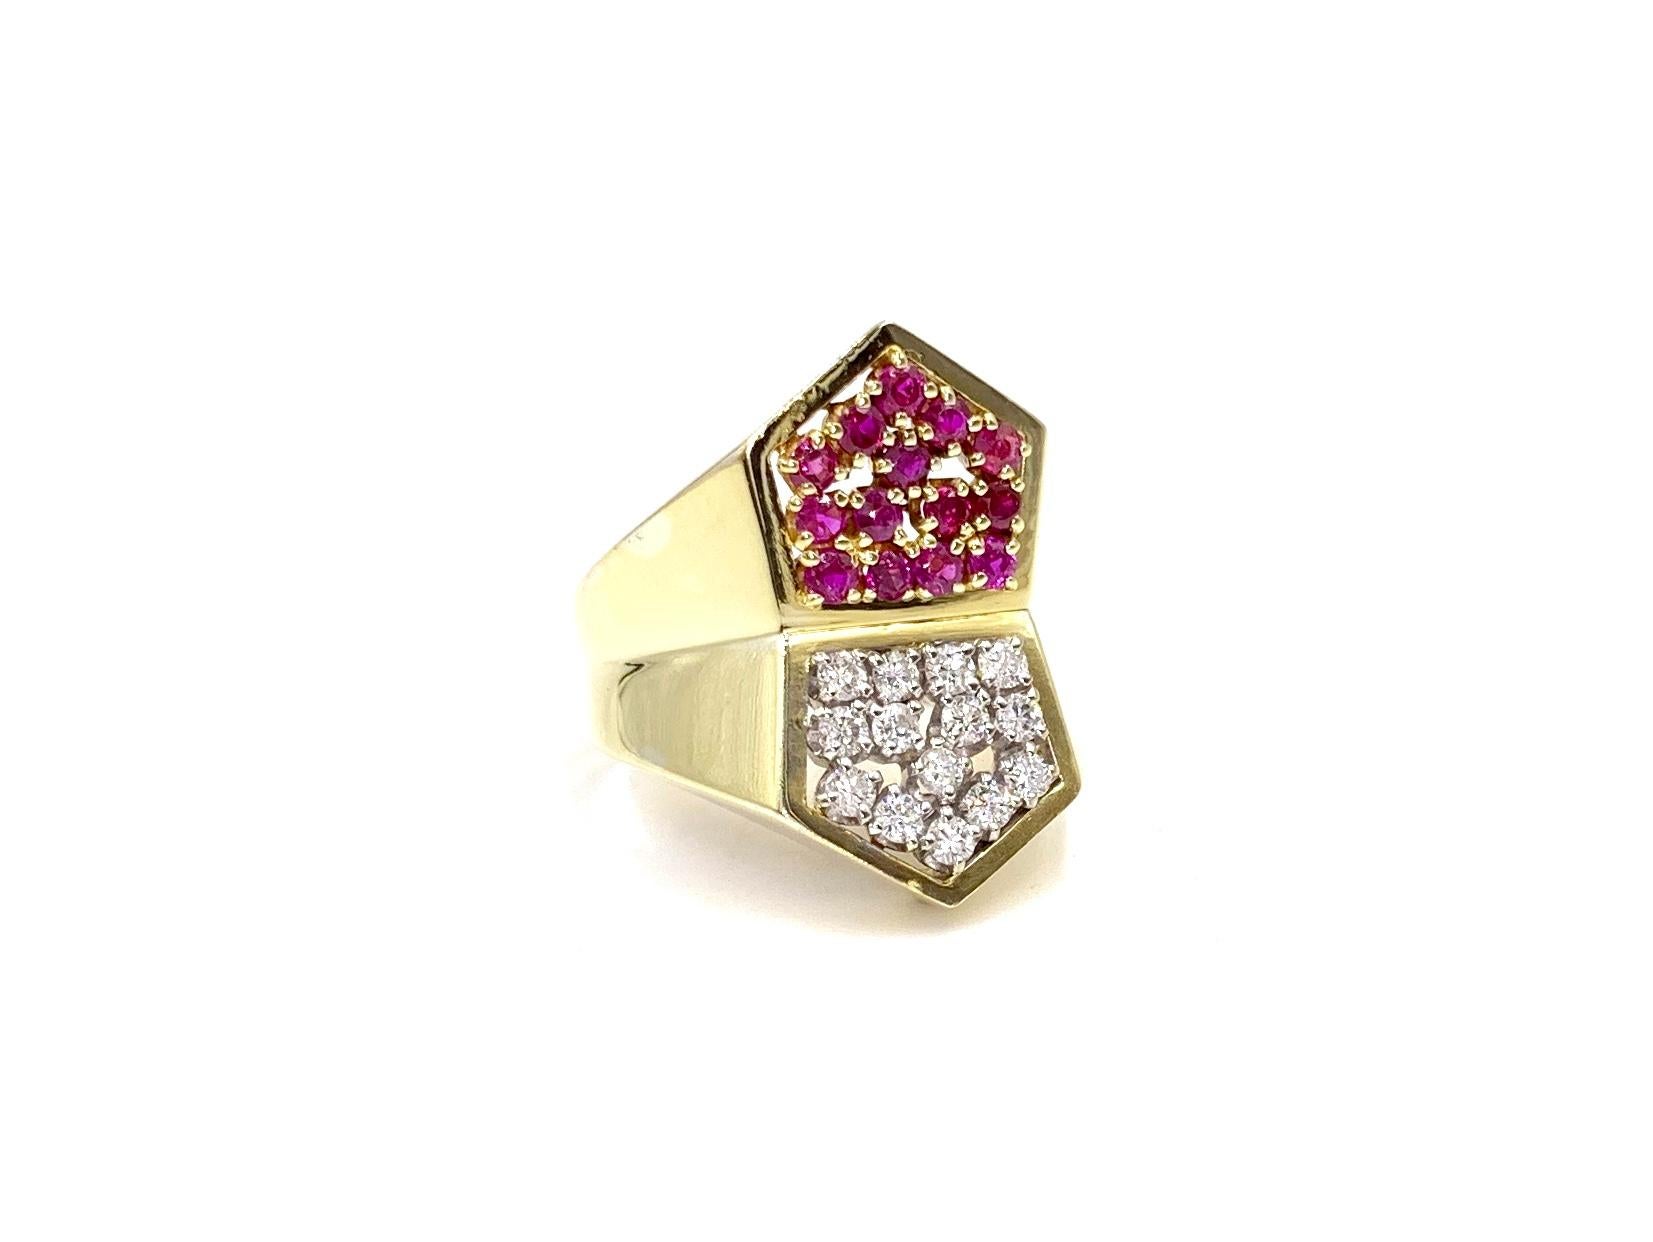 Created by Italian expert goldsmith designer, Toliro Jewelry Company. This polished 18 karat gold modern elongated geometric ring features 14 round brilliant diamonds and 14 well saturated round rubies. Approximate diamond weight is .49 carats total